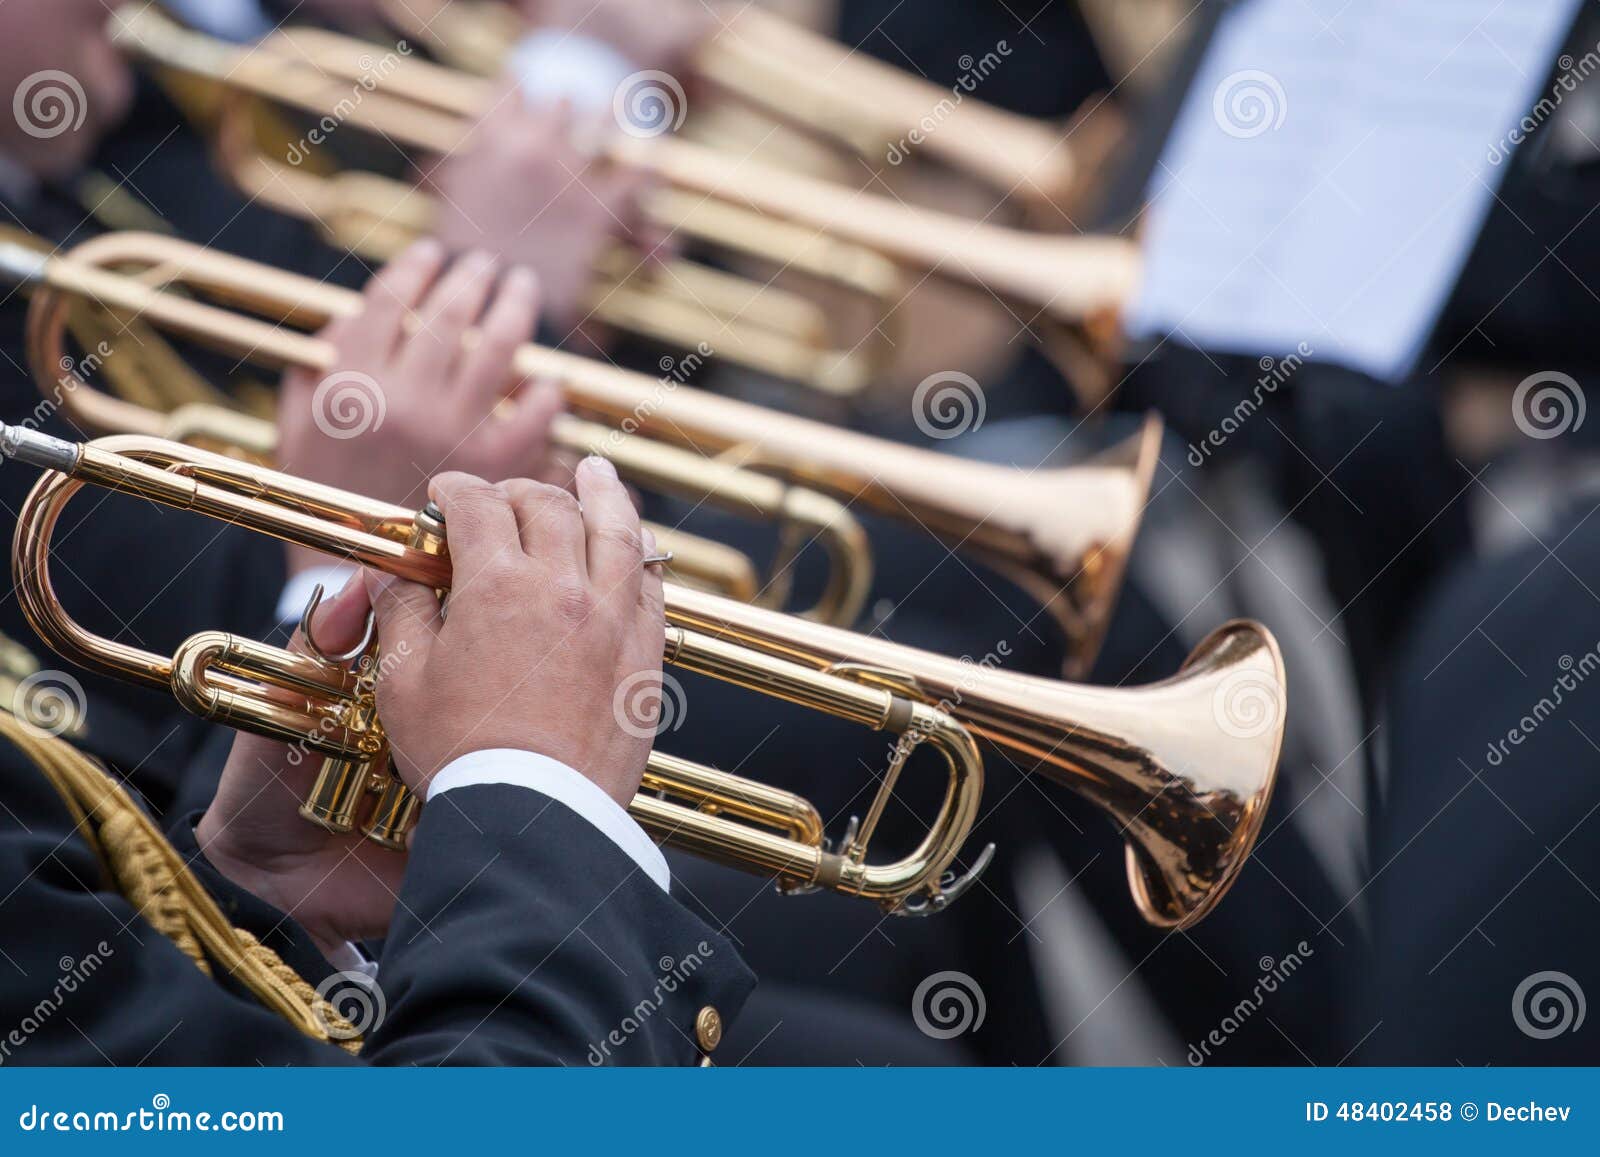 musicians playing on trumpets